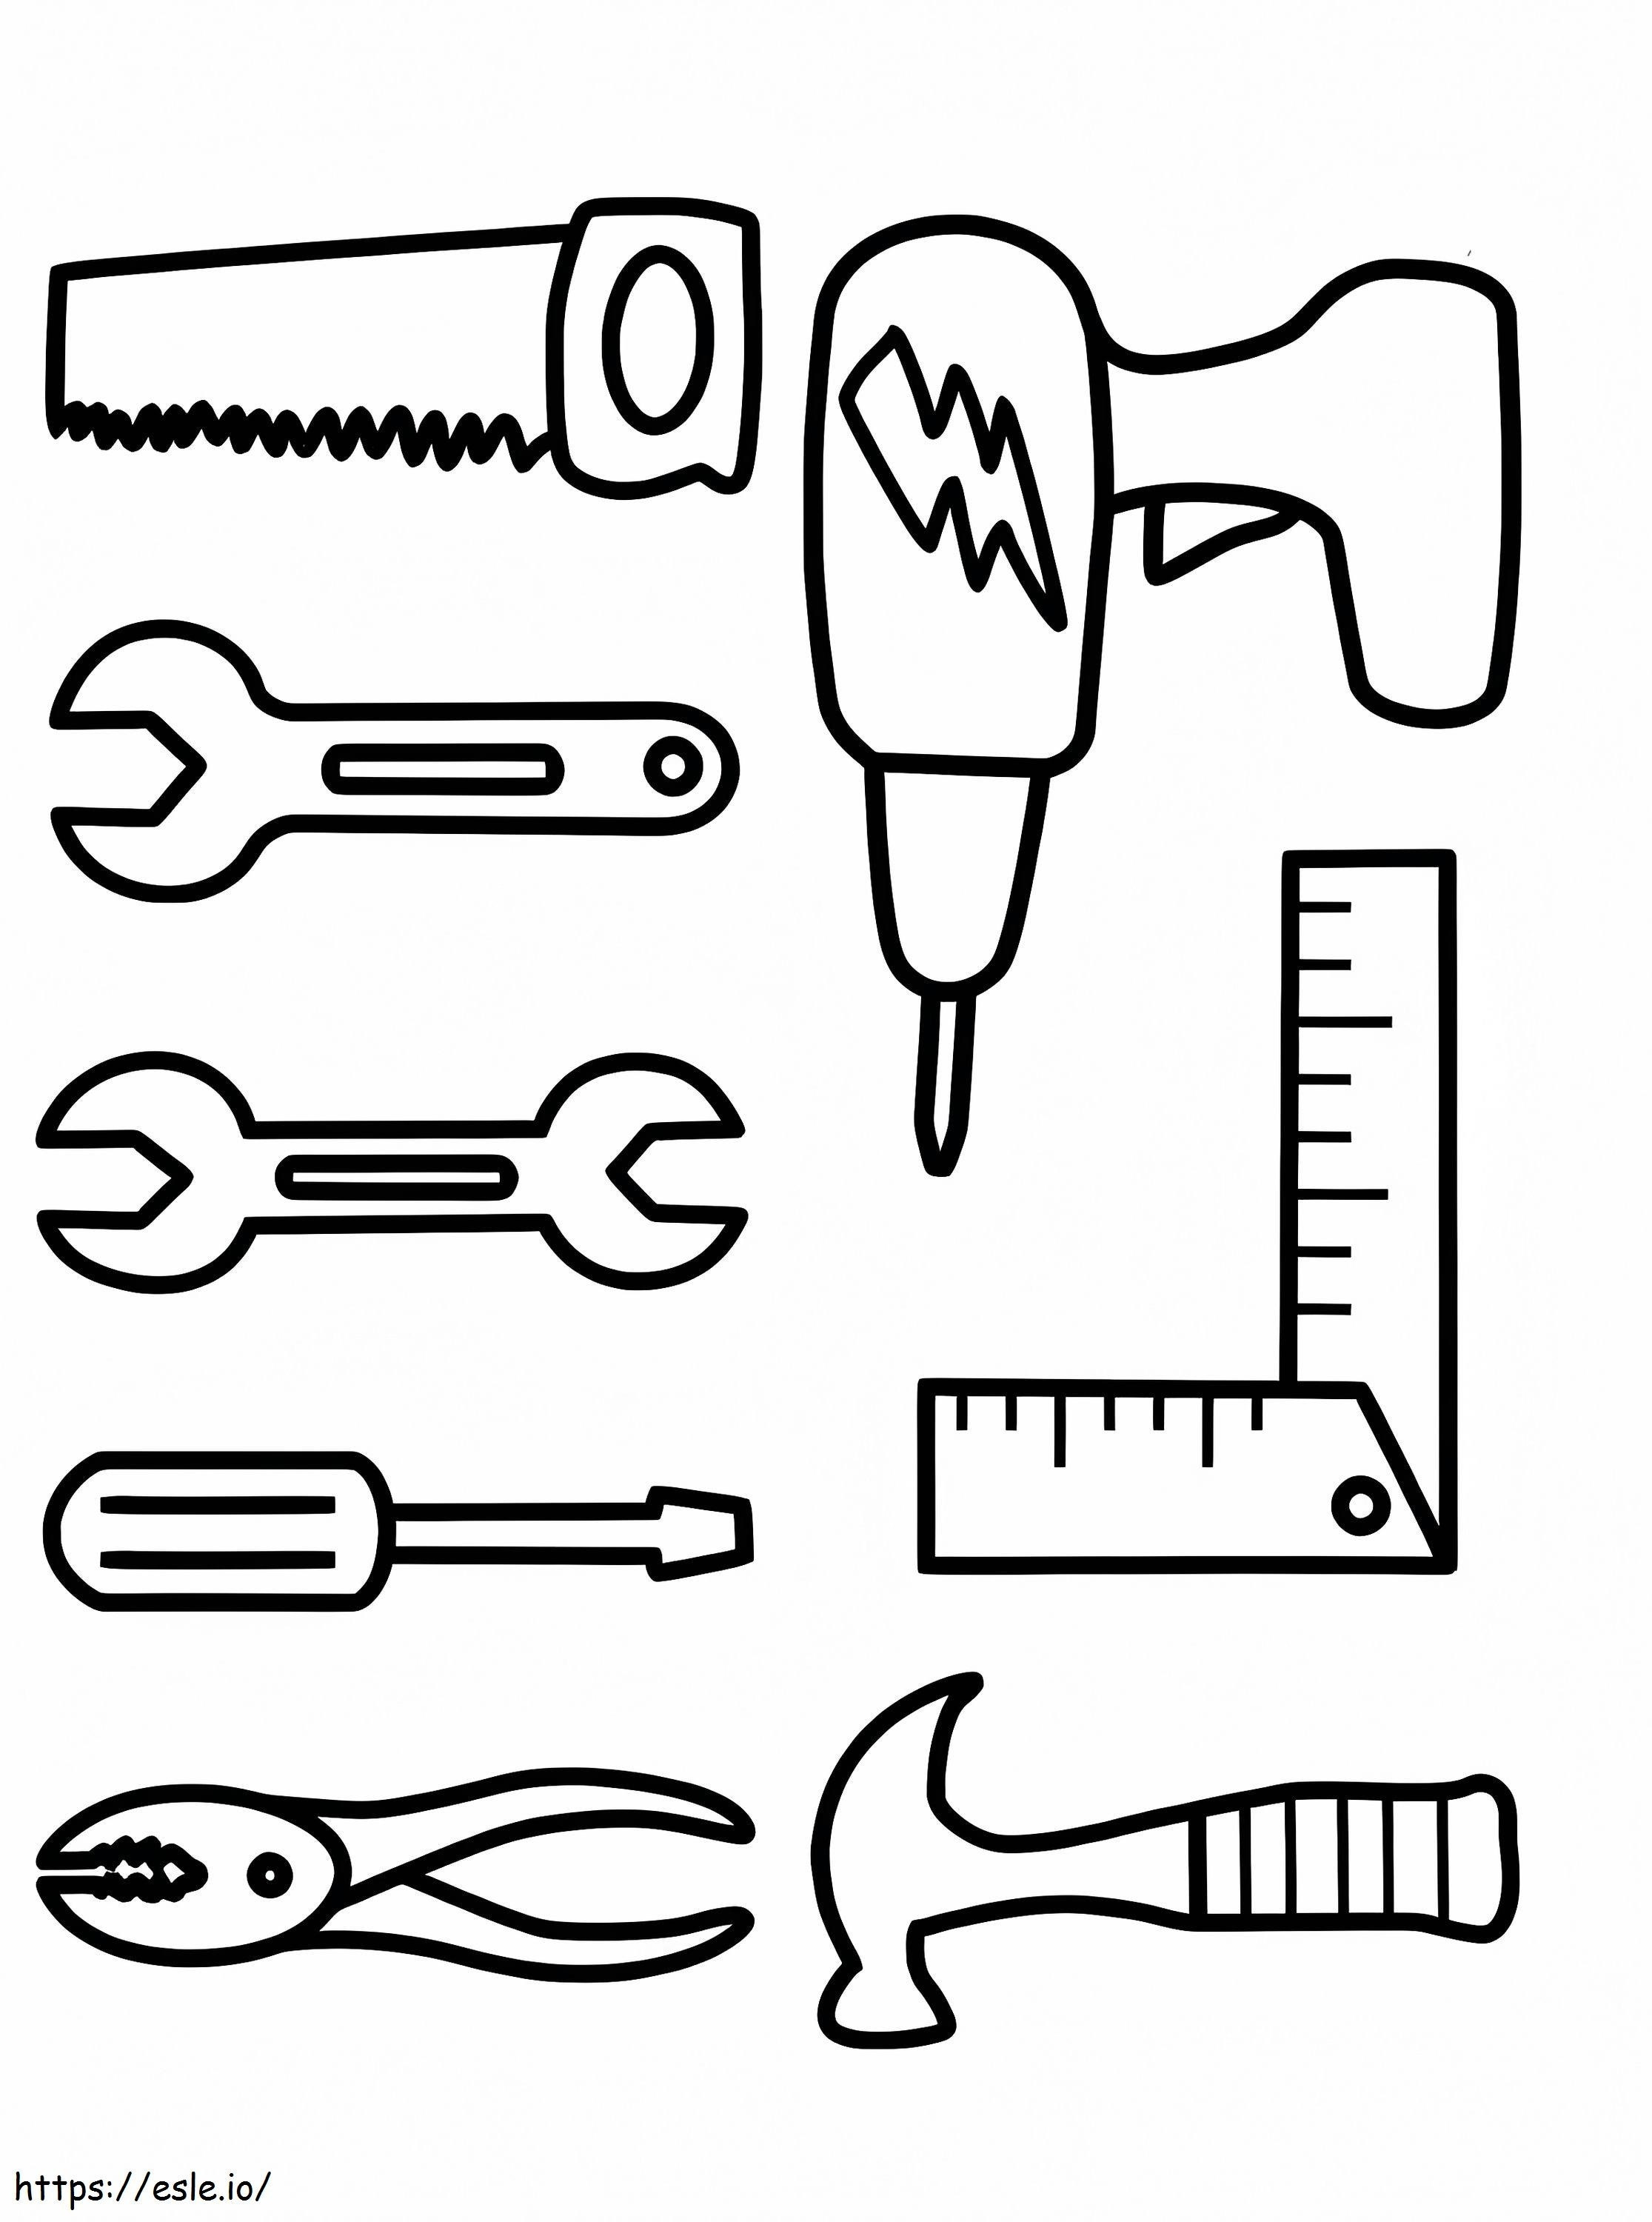 Printable Tools coloring page